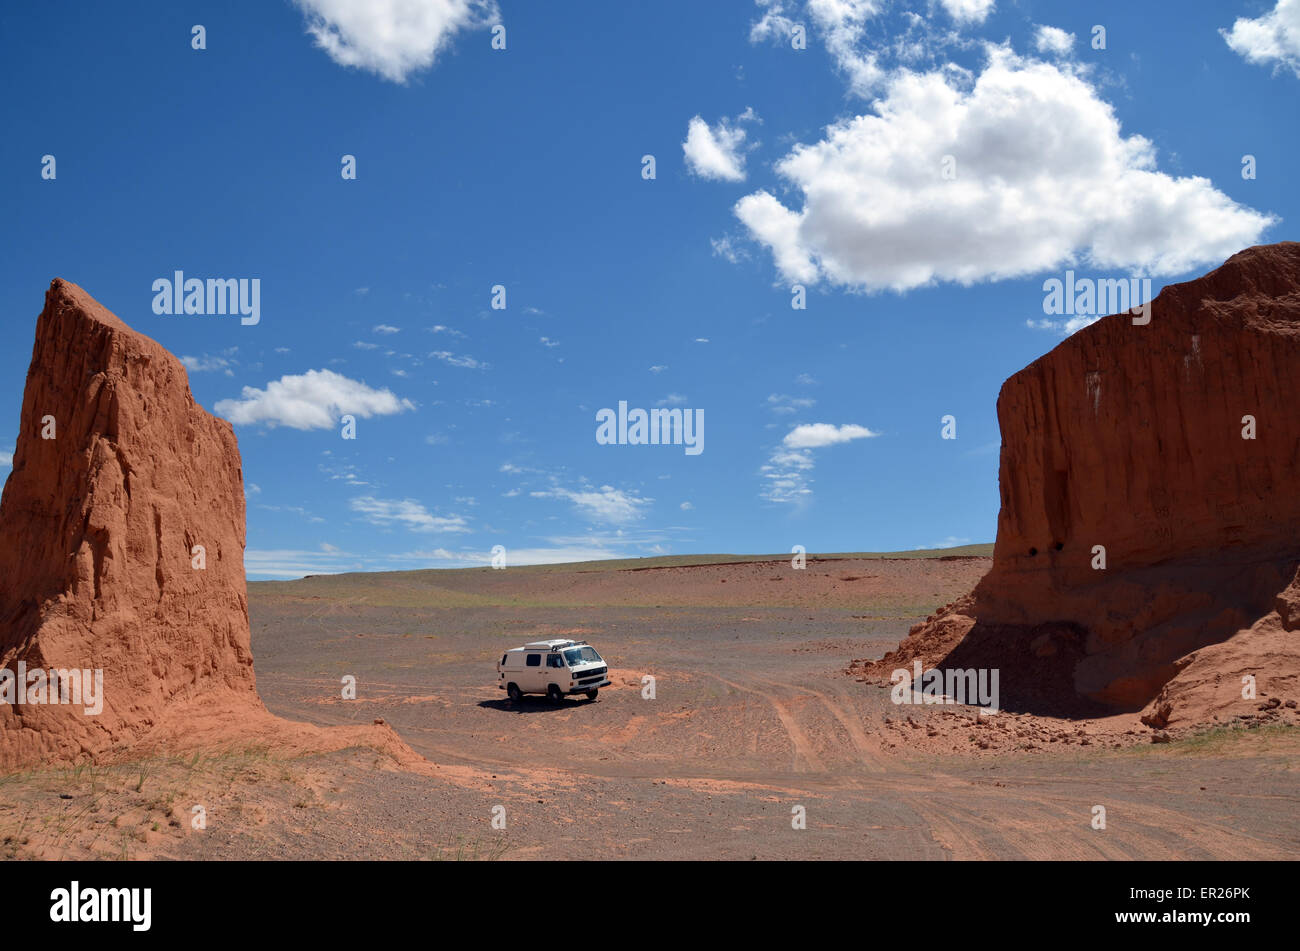 My car at Bayanzag cliffs, also known as flaming cliffs, in the Gobi desert, Omnogovi province, Mongolia. Stock Photo